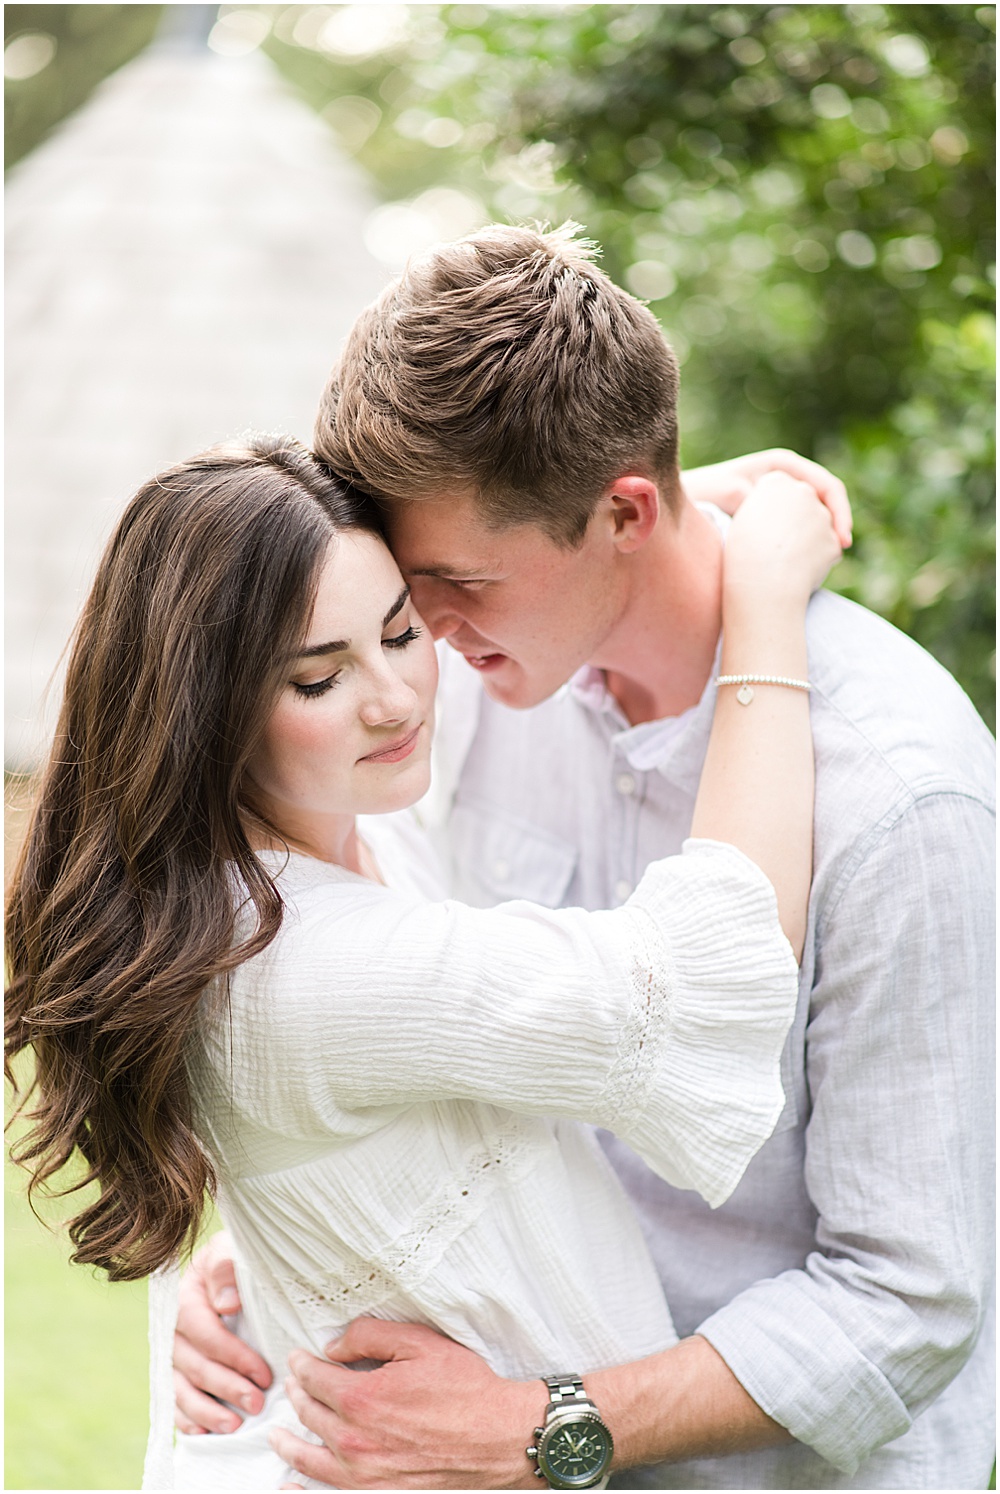 Katie Gallagher's Favorite Engagement Session Locations